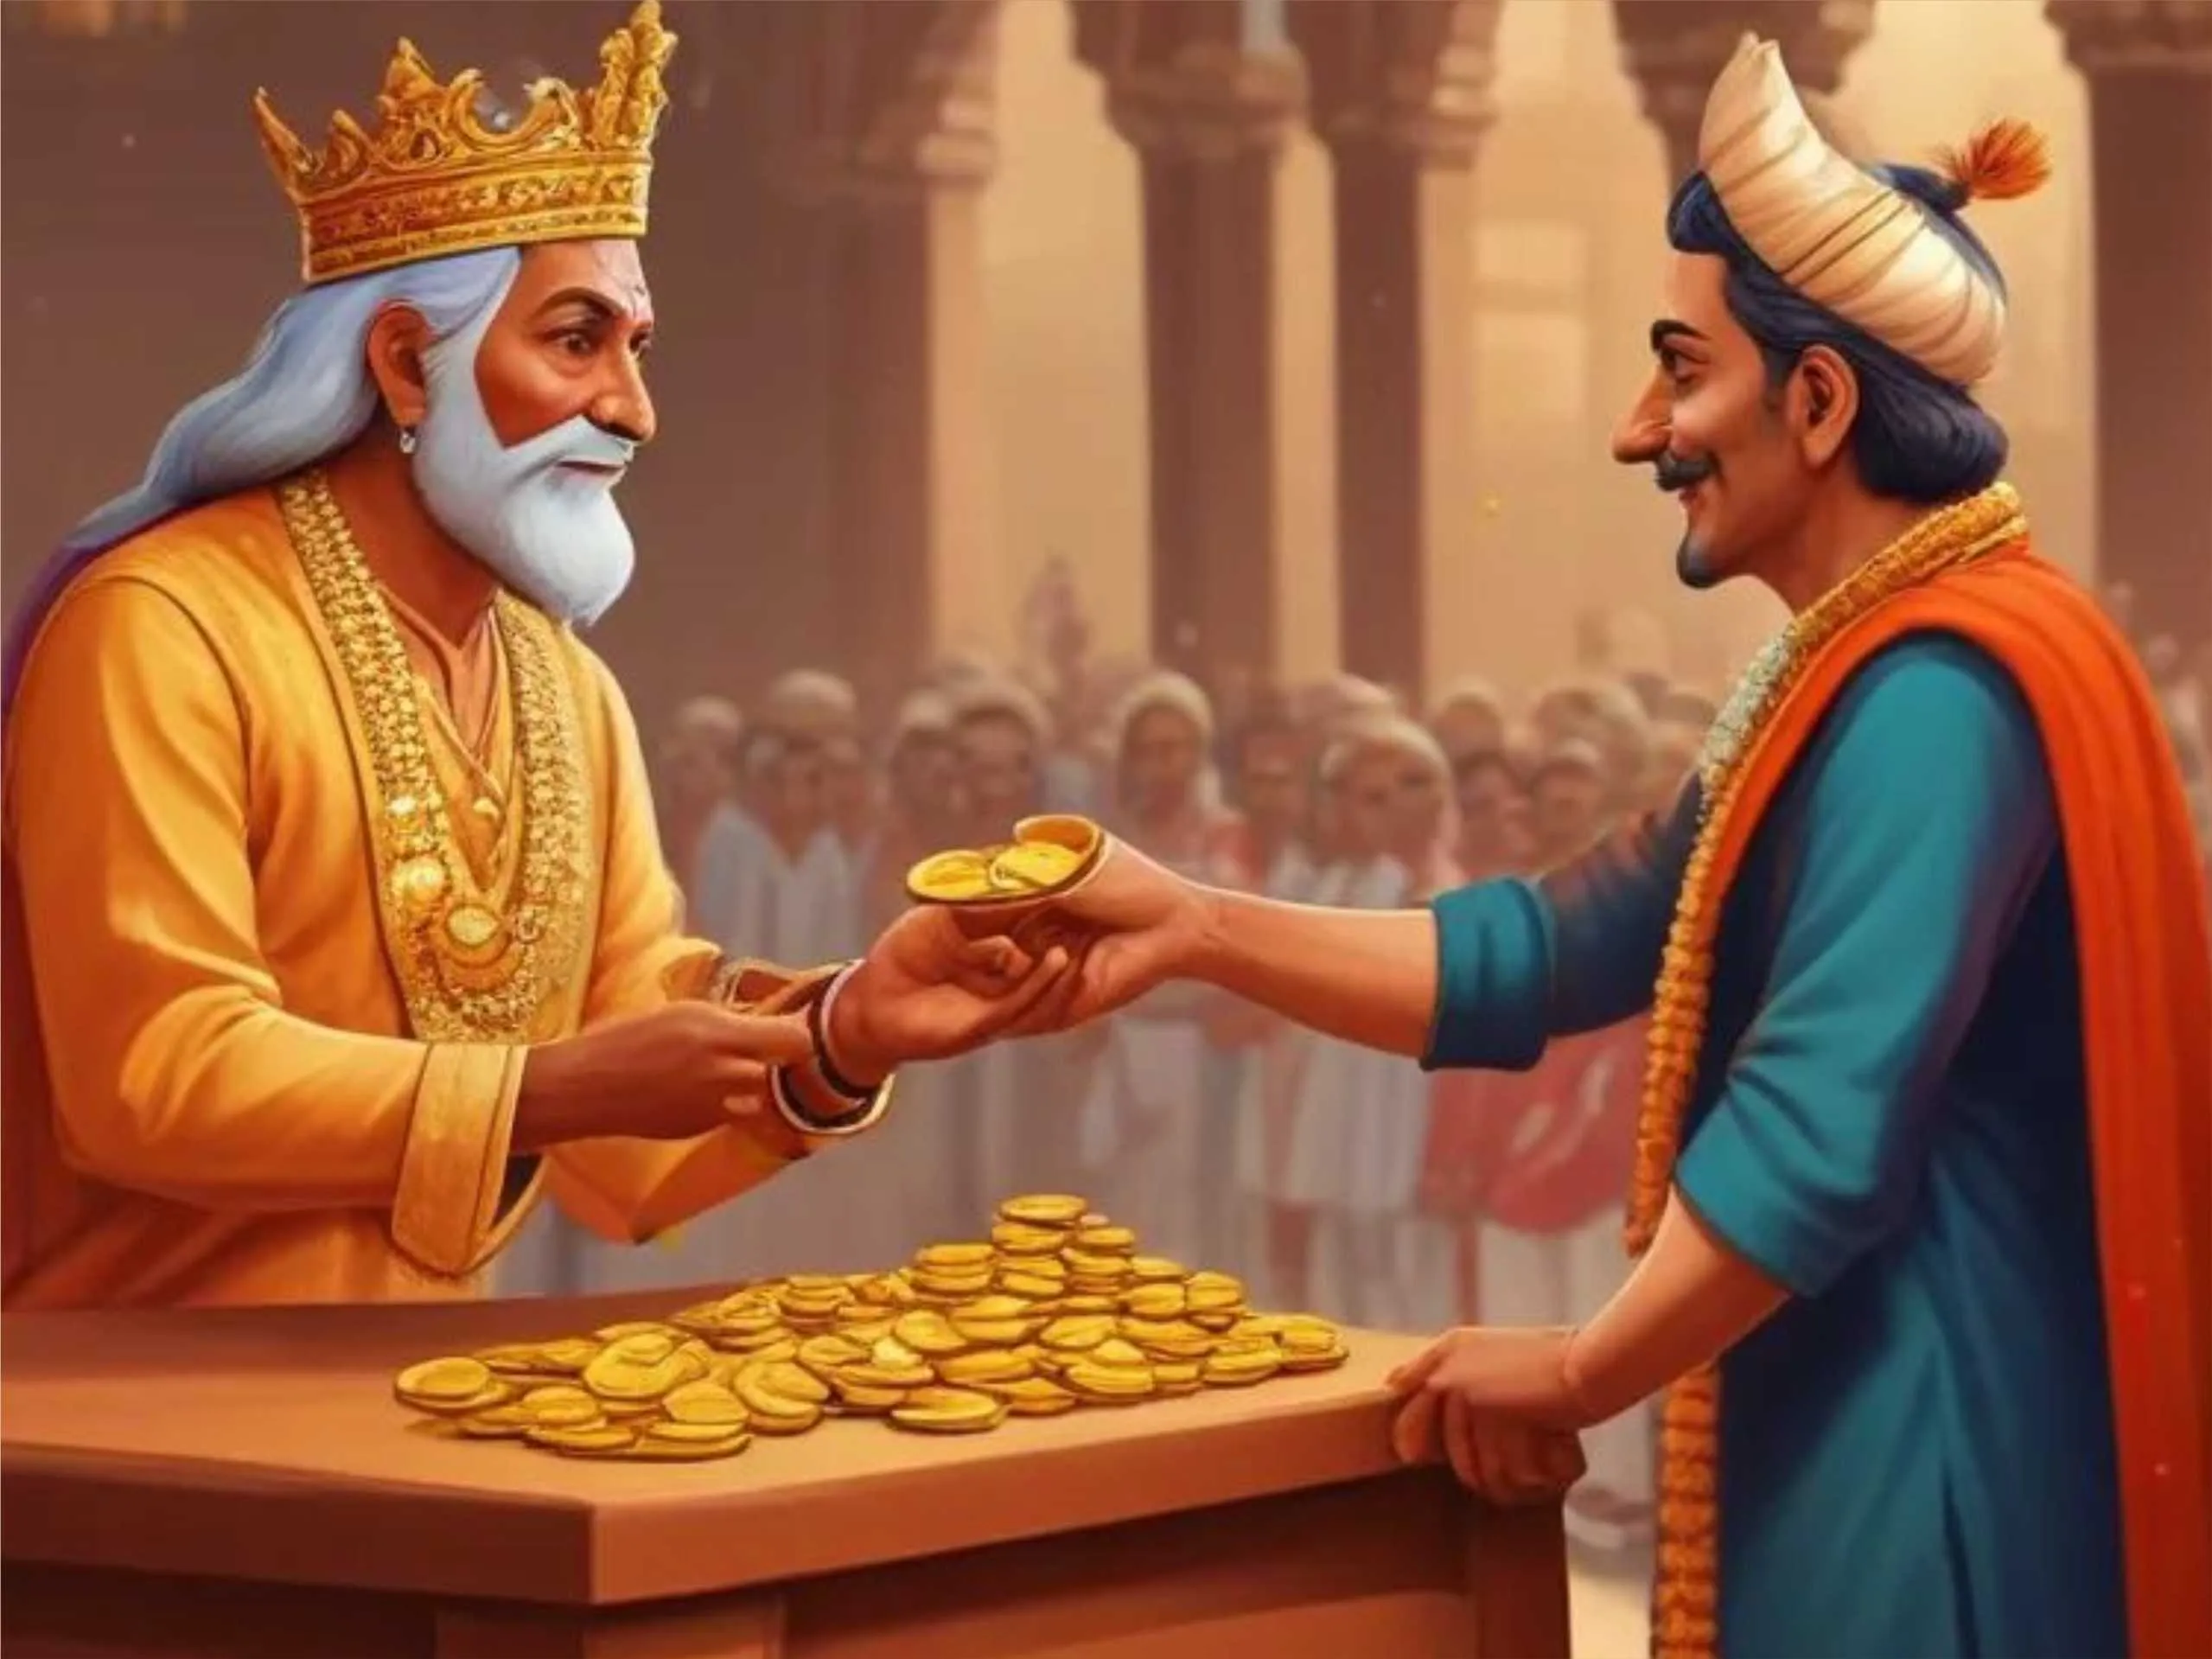 king giving gold coins to a man cartoon image